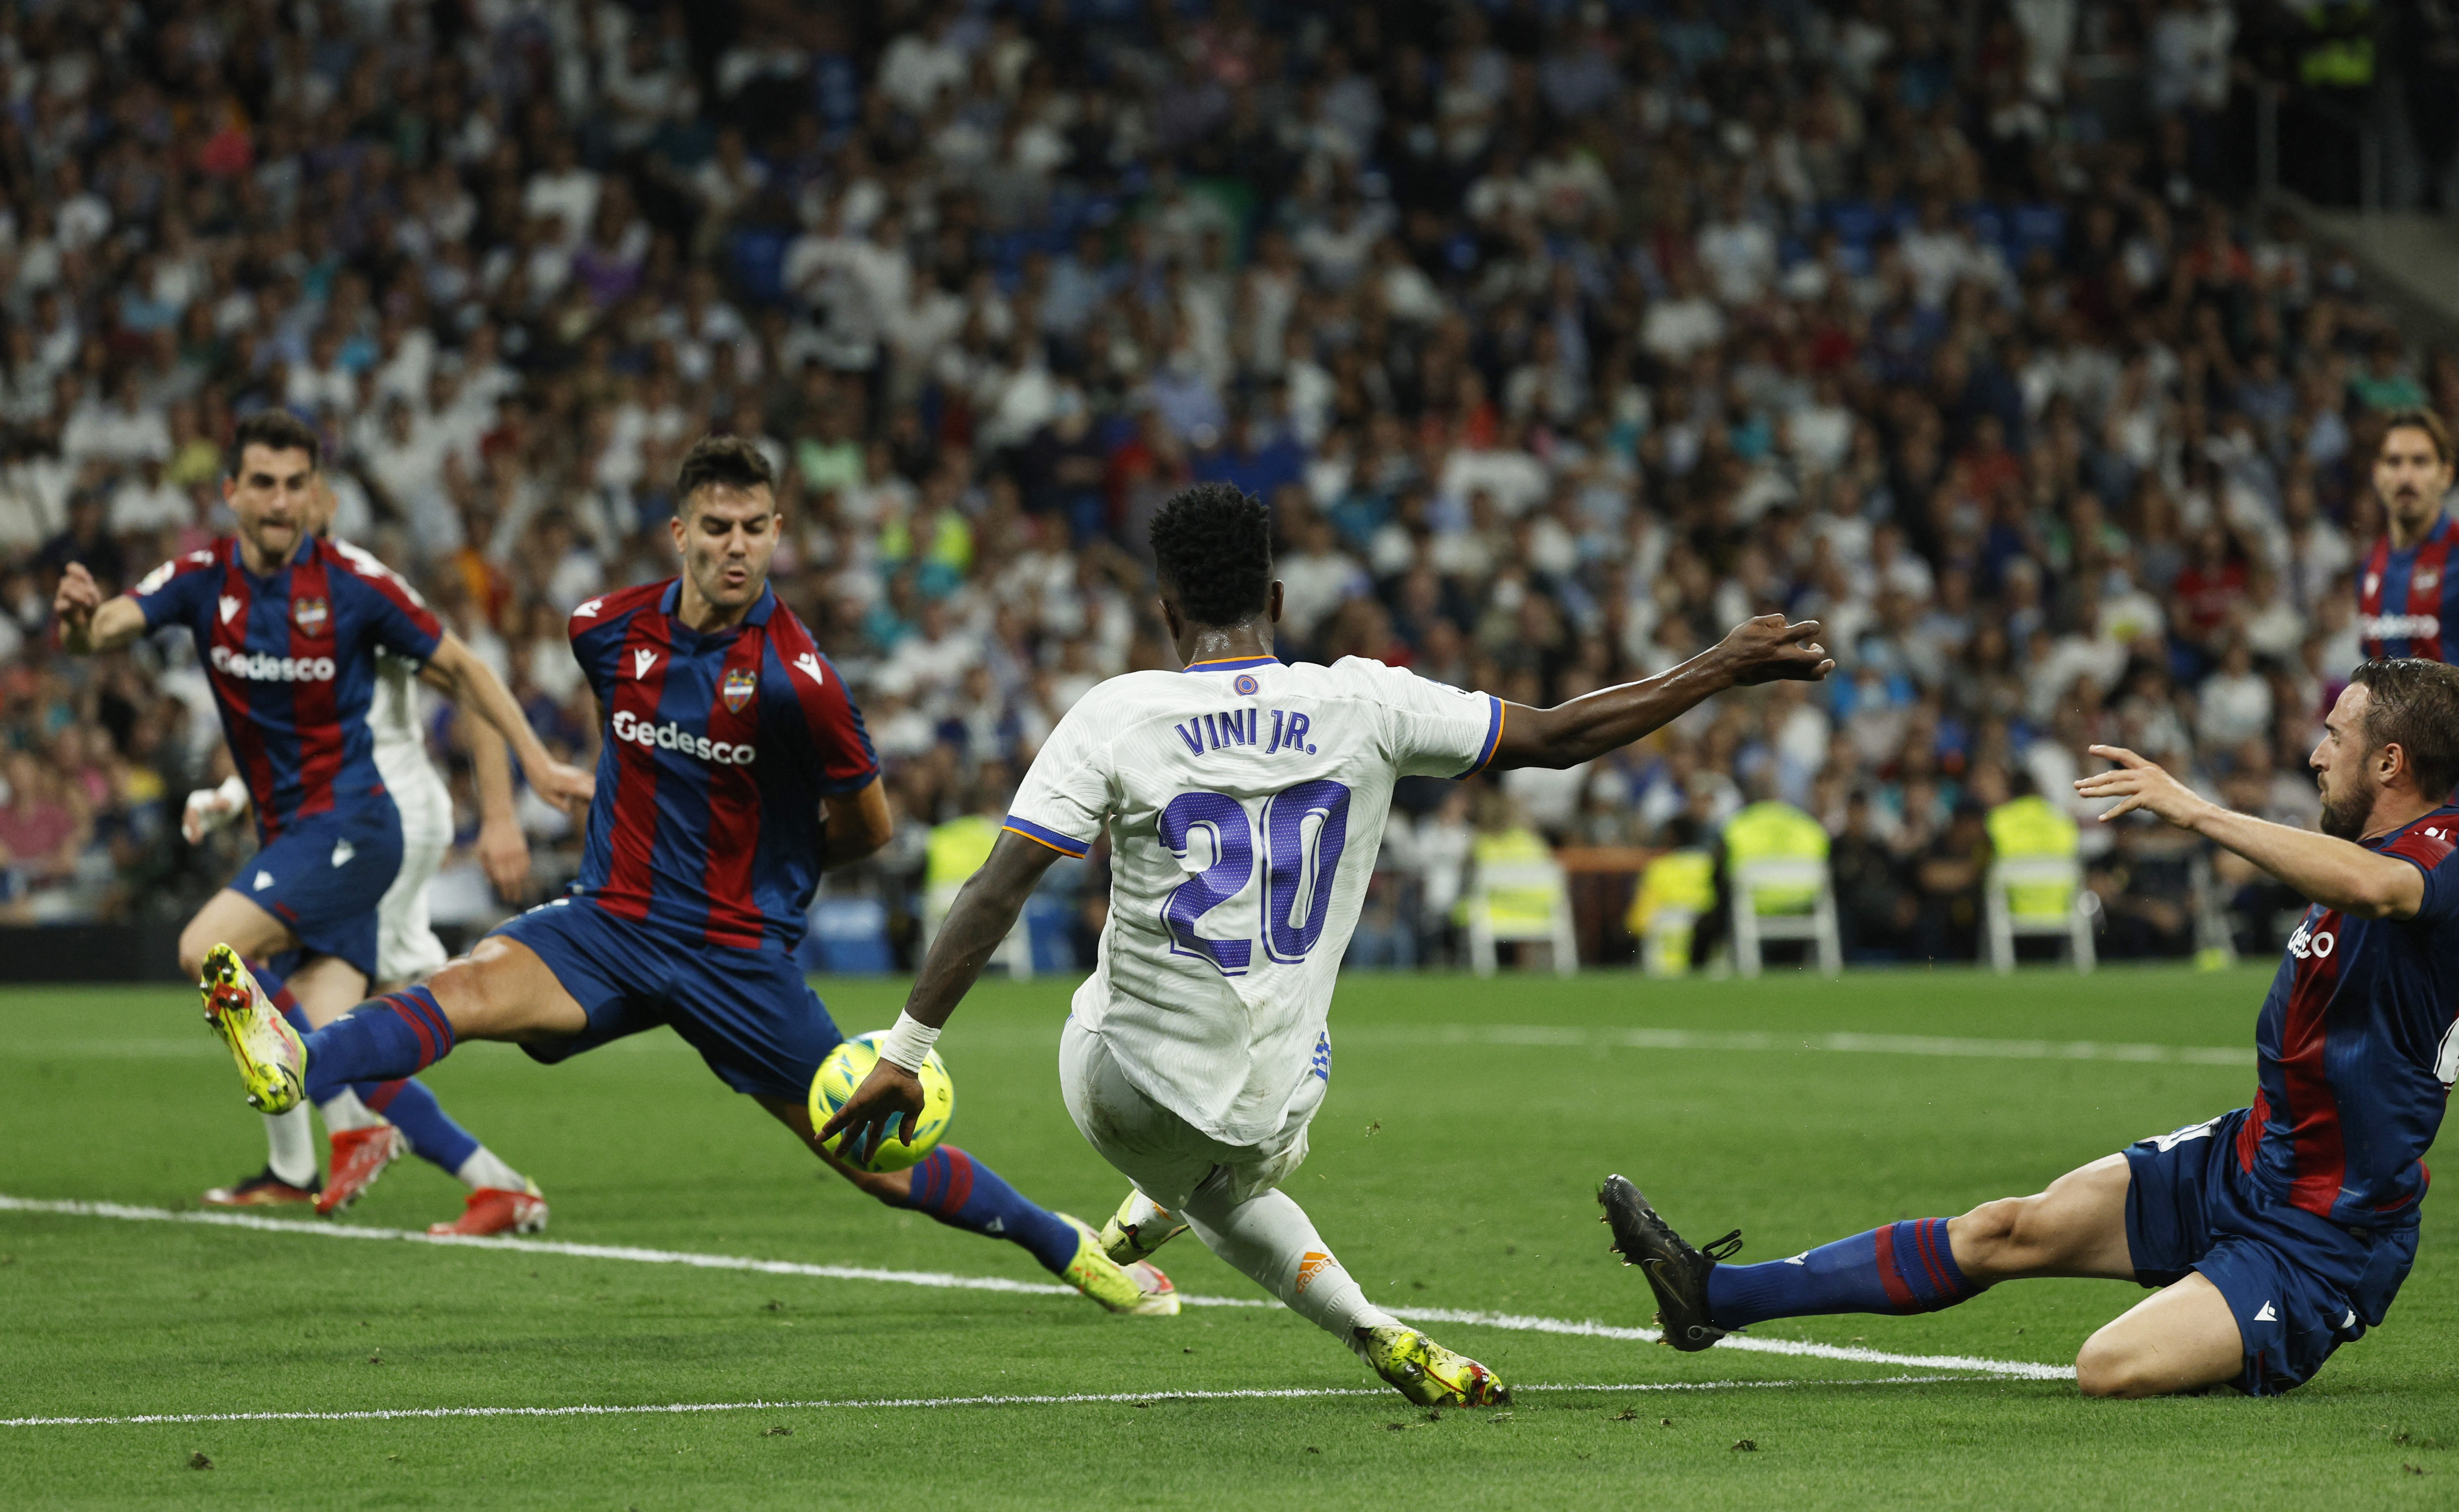 Levante relegated after being demolished 6-0 by Real Madrid | Reuters